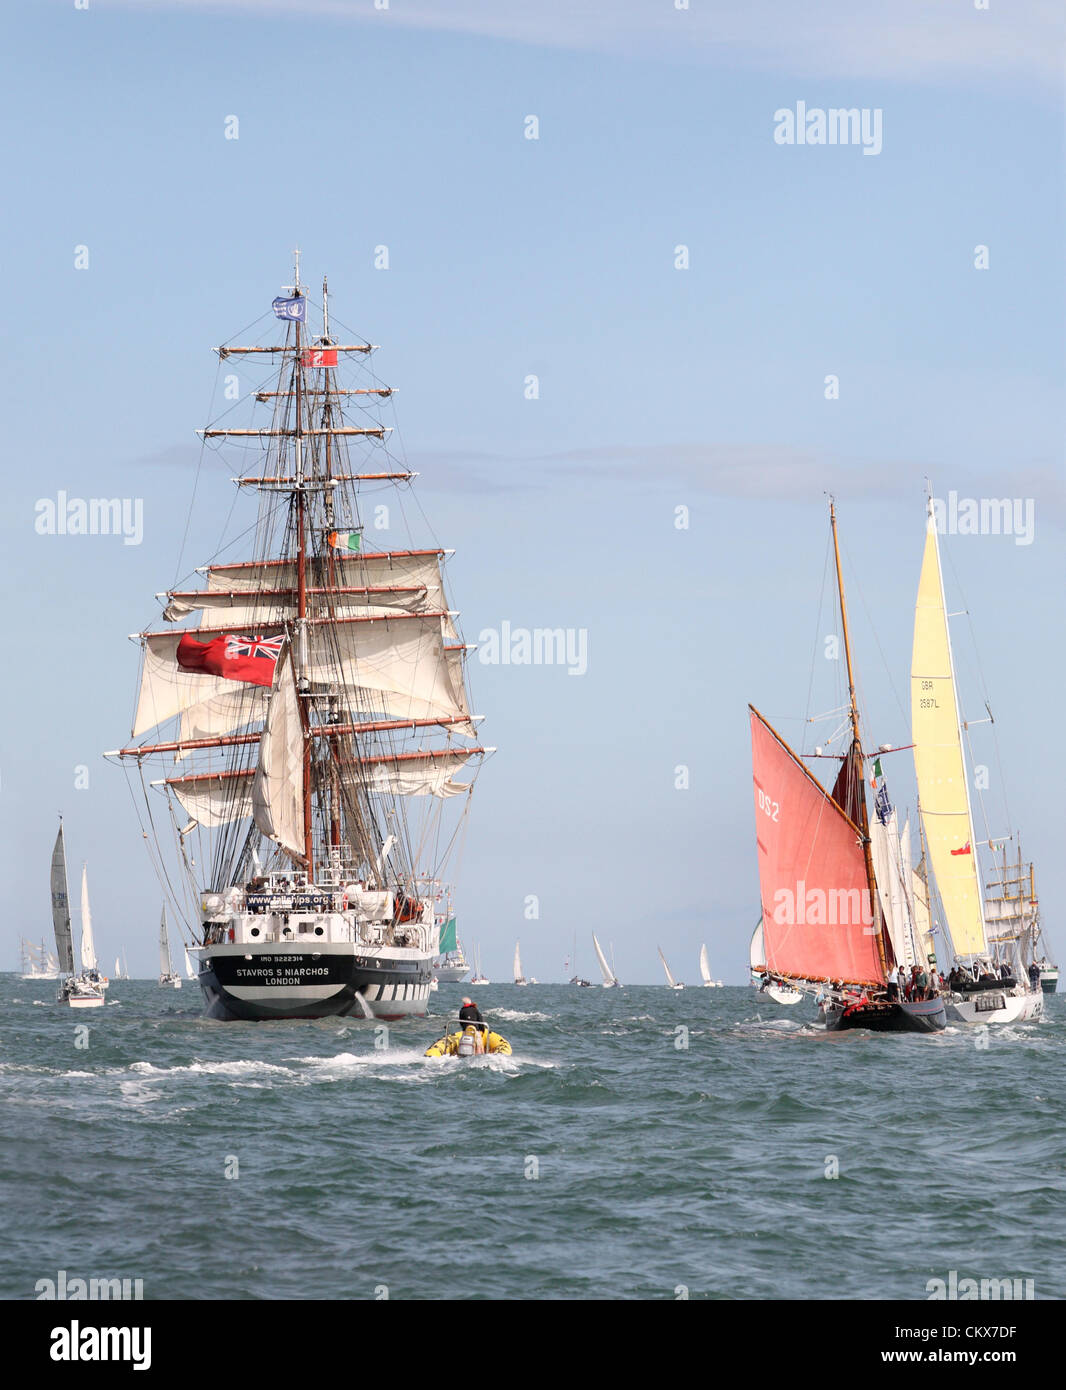 26th Aug 2012. After three days in port finally the tall ships have a tremendous send off as they leave Dublin Bay, over one million people lined the quayside in Dublin over three days while hundreds of pleasure craft gathered in the bay to escort the ships as they paraded along the coast. Pictured are the Stavros S Niarchos and the Jolie Brise (red sail) Credit:  Ian Shipley SHPS / Alamy Live News Stock Photo